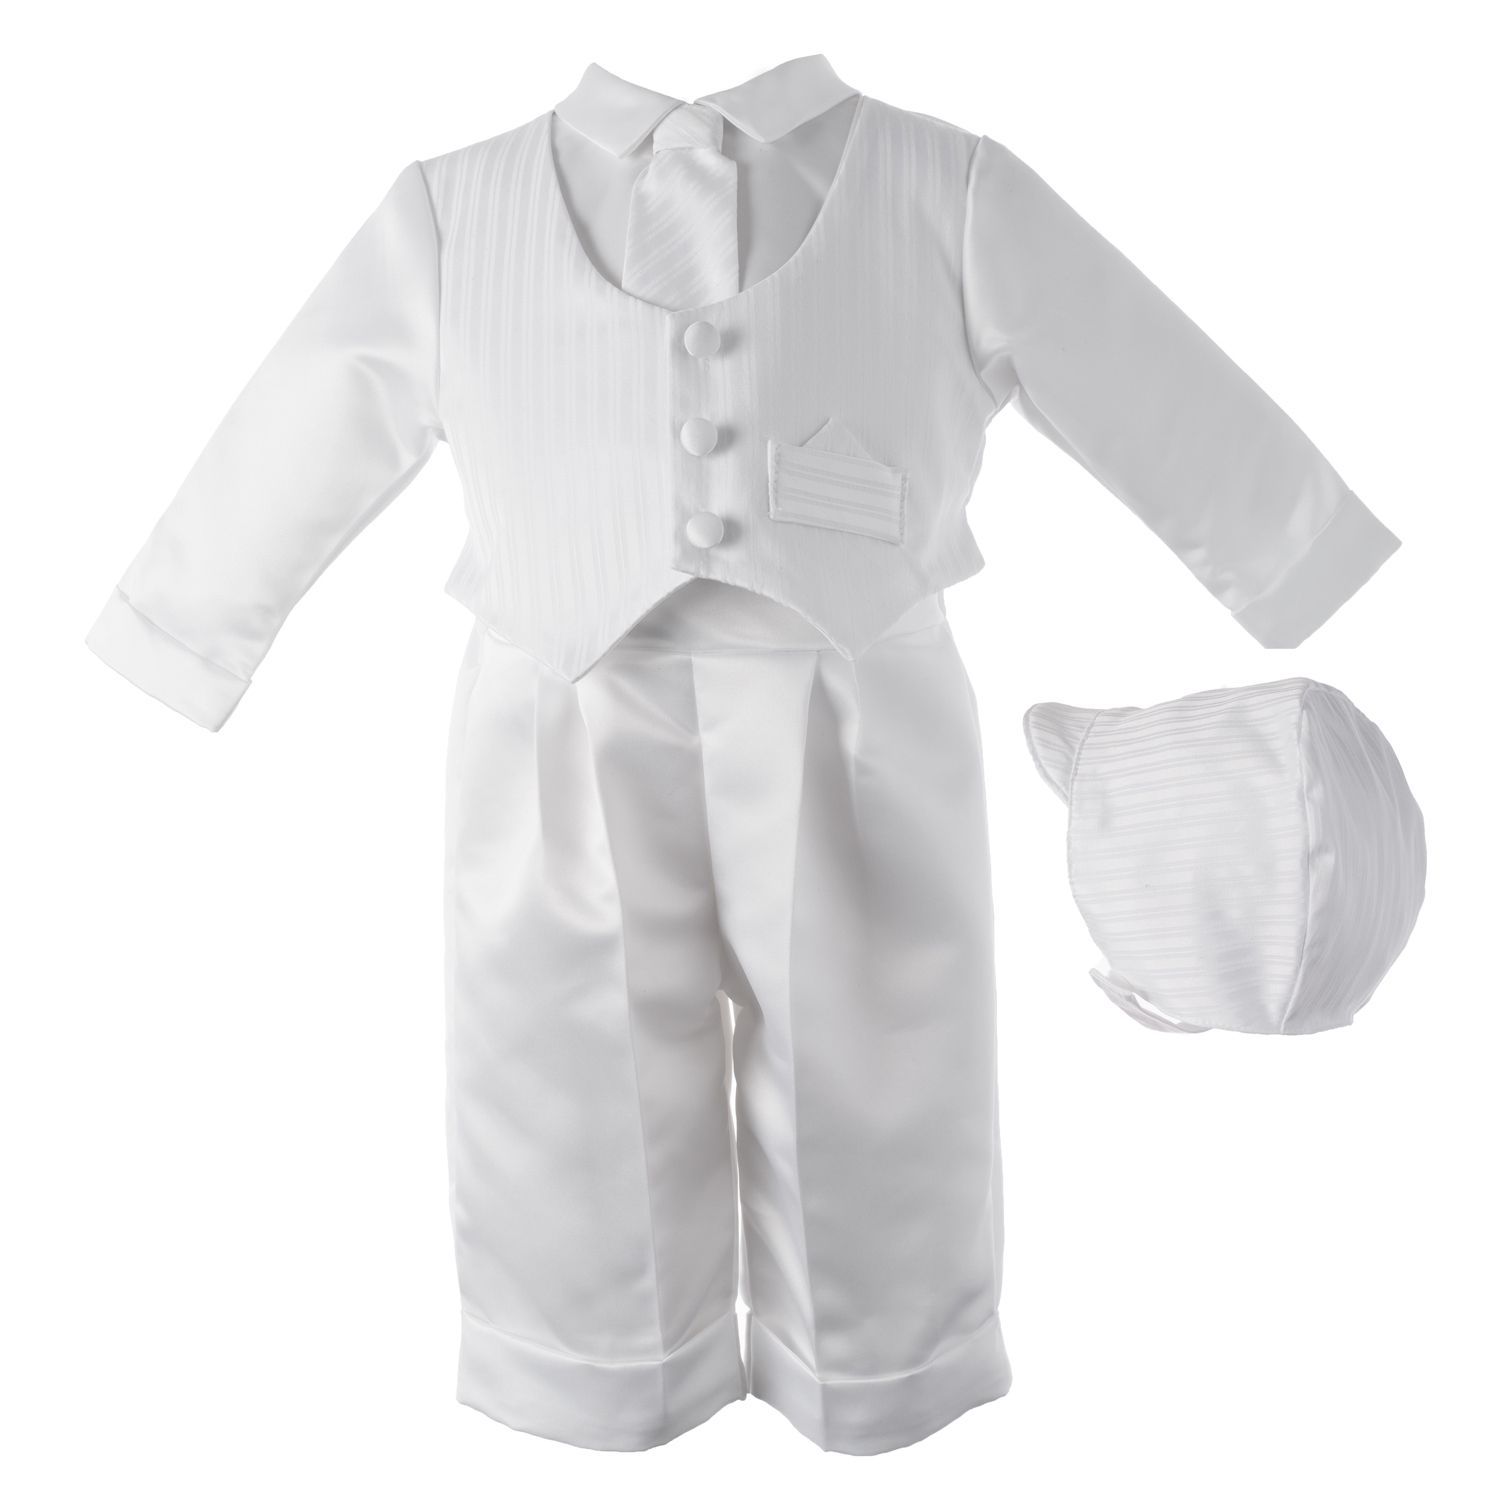 3t baptism outfit boy